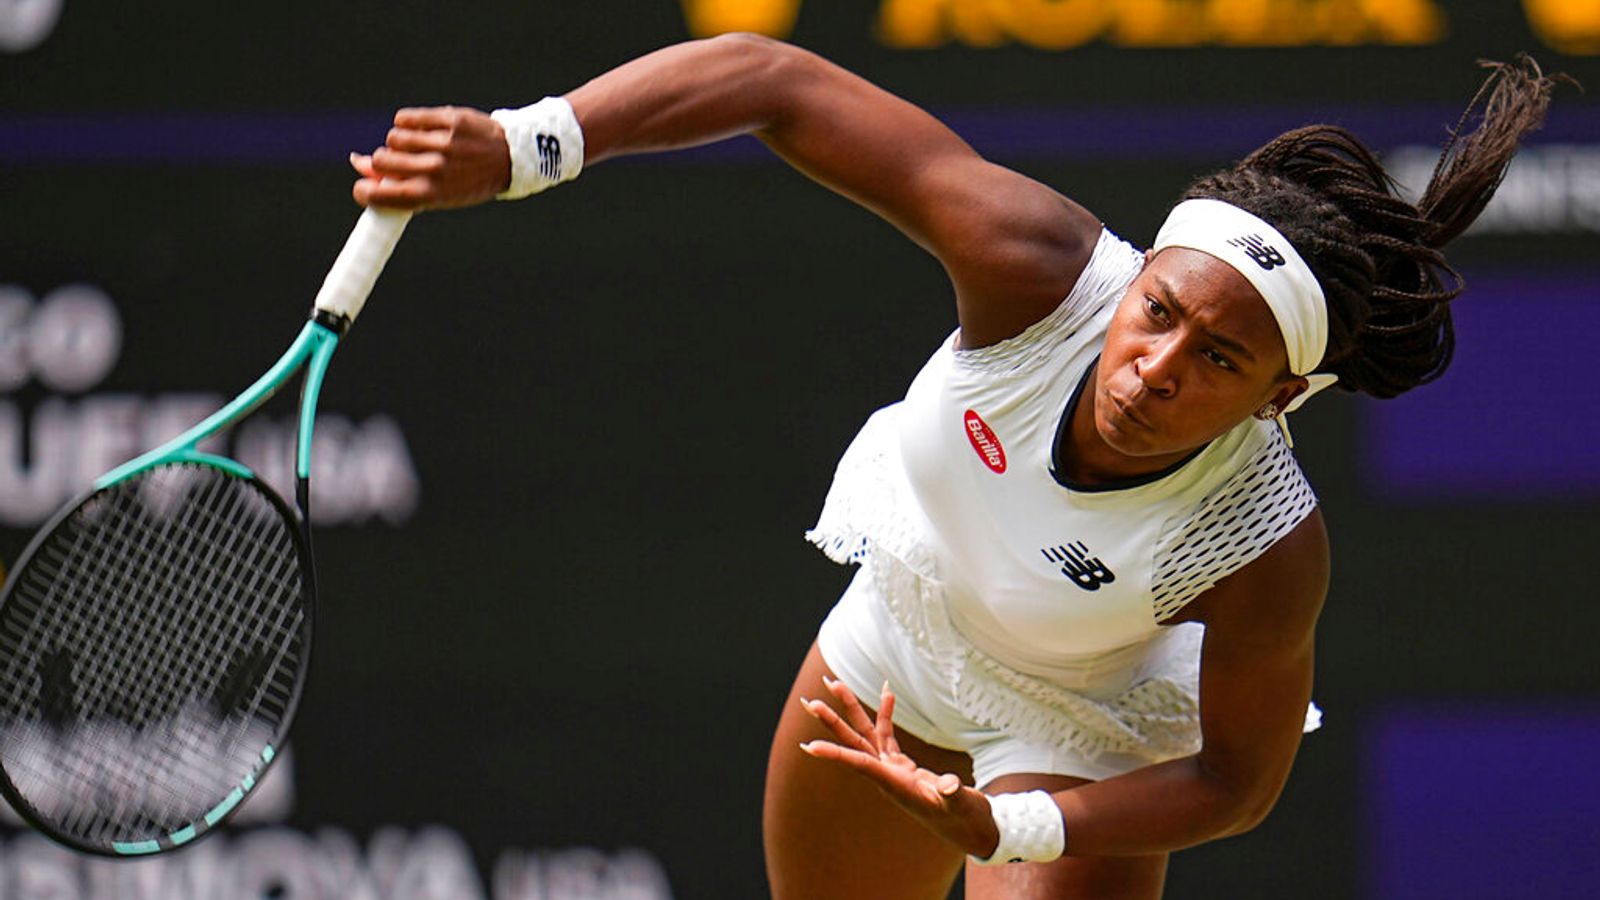 Wimbledon: Coco Gauff and Heather Watson welcome move to allow female players to wear coloured shorts